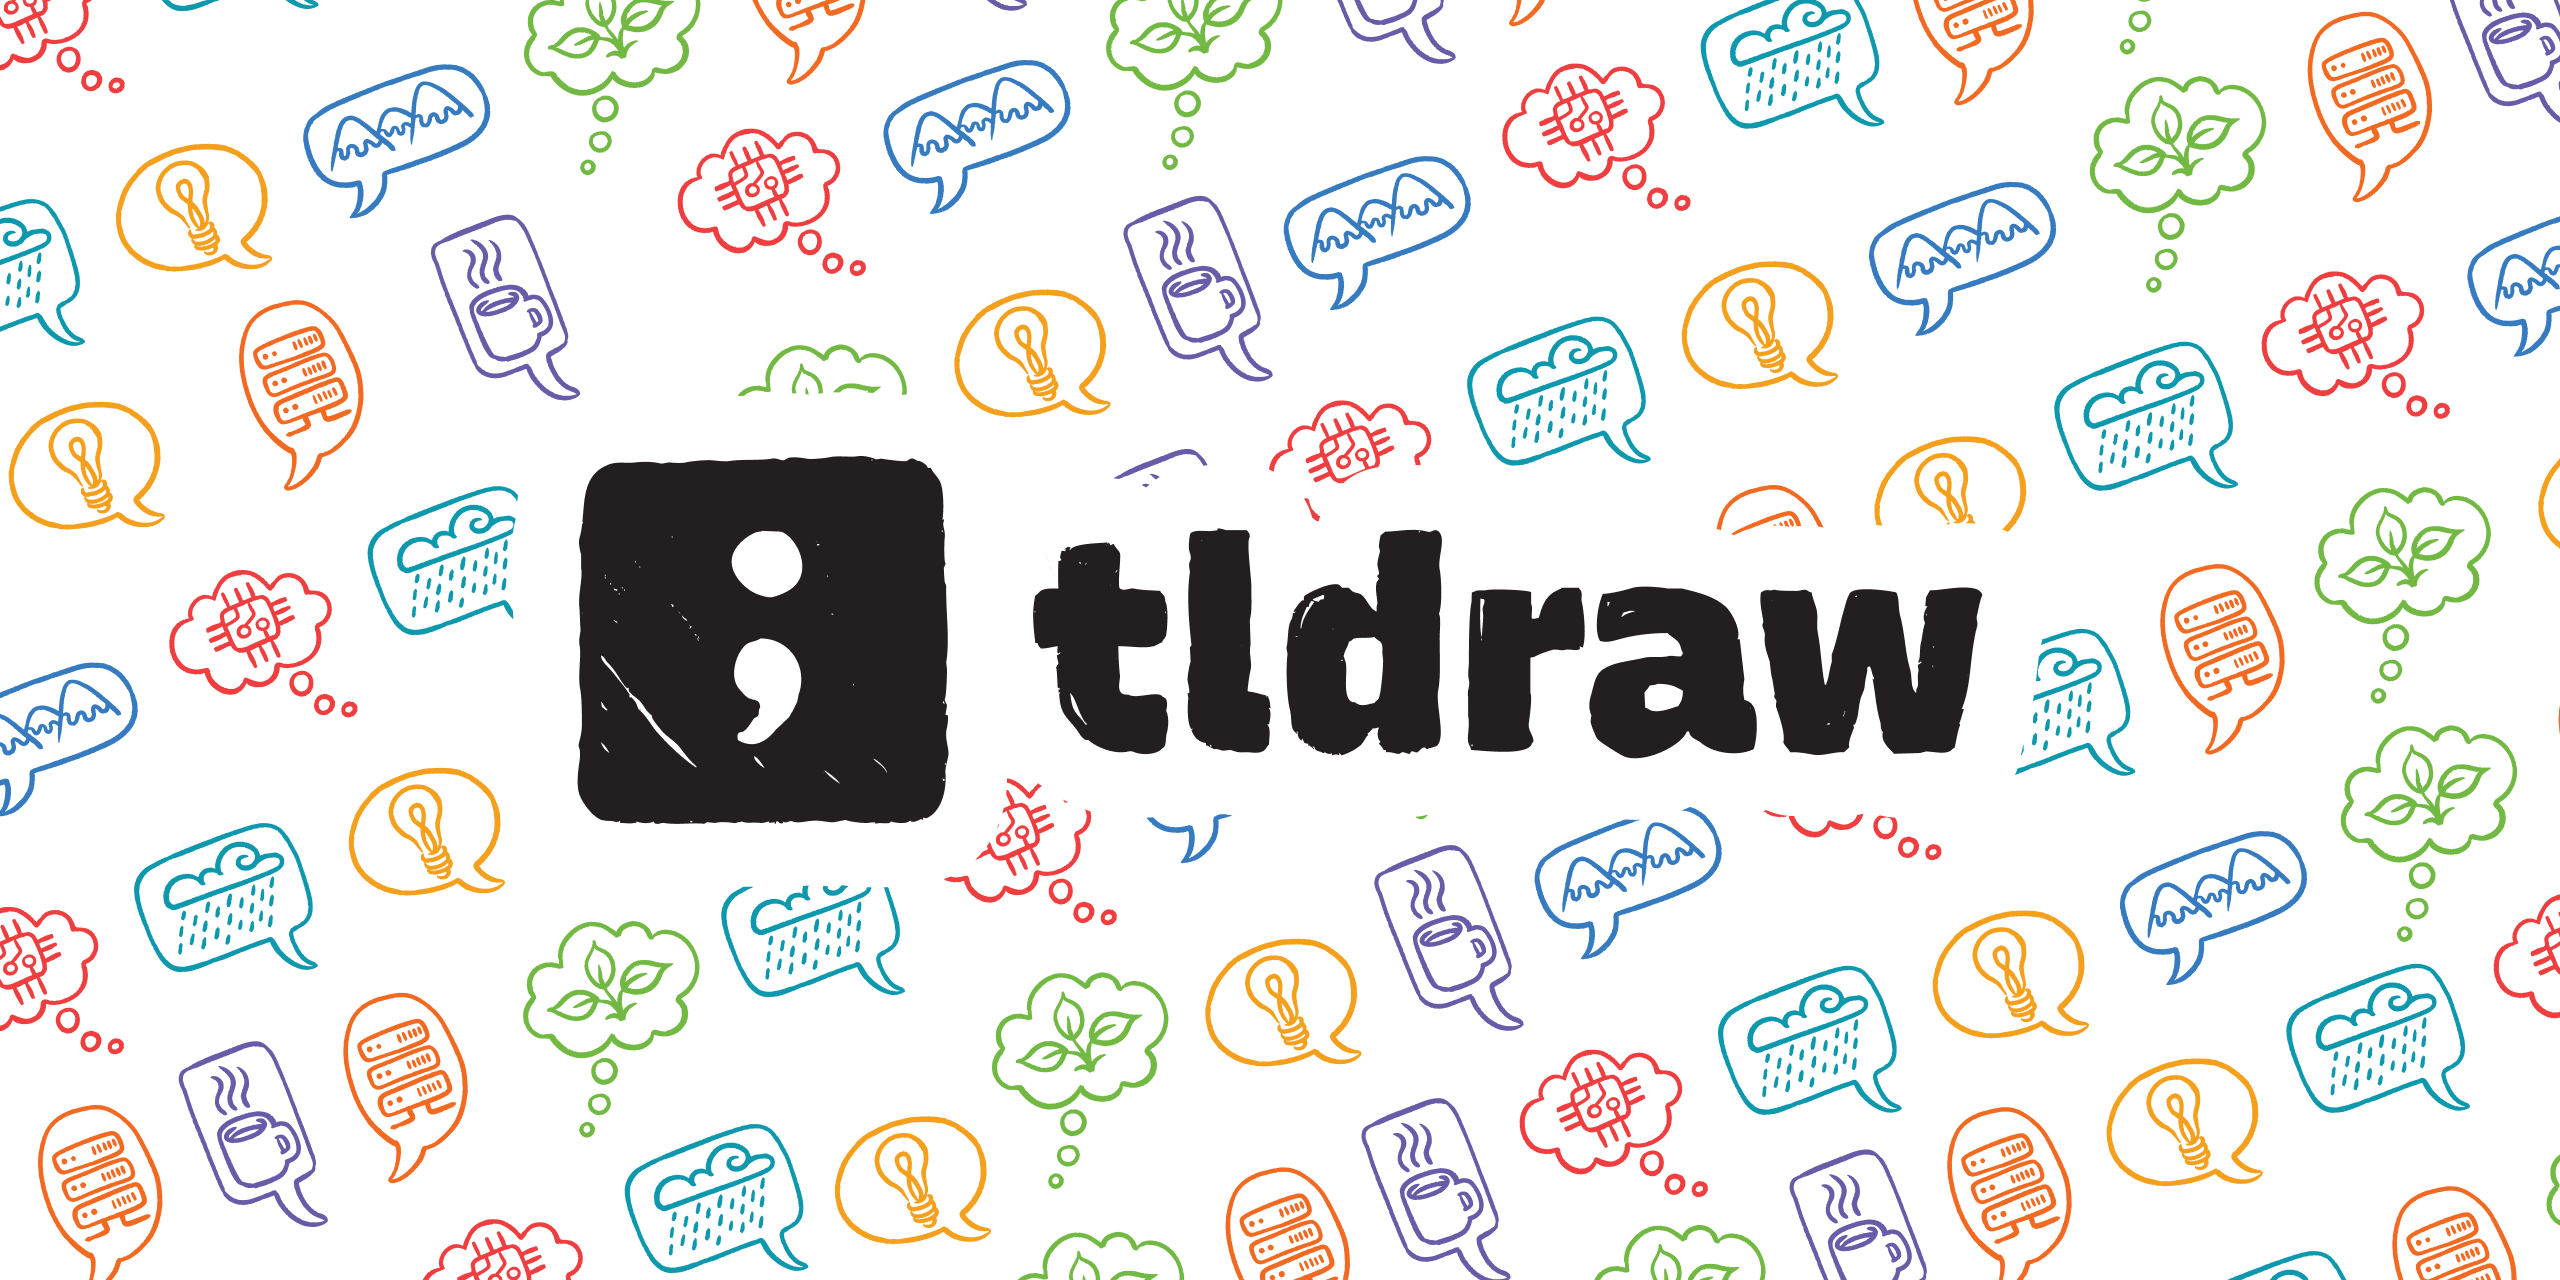 demo-picture-of-tldraw